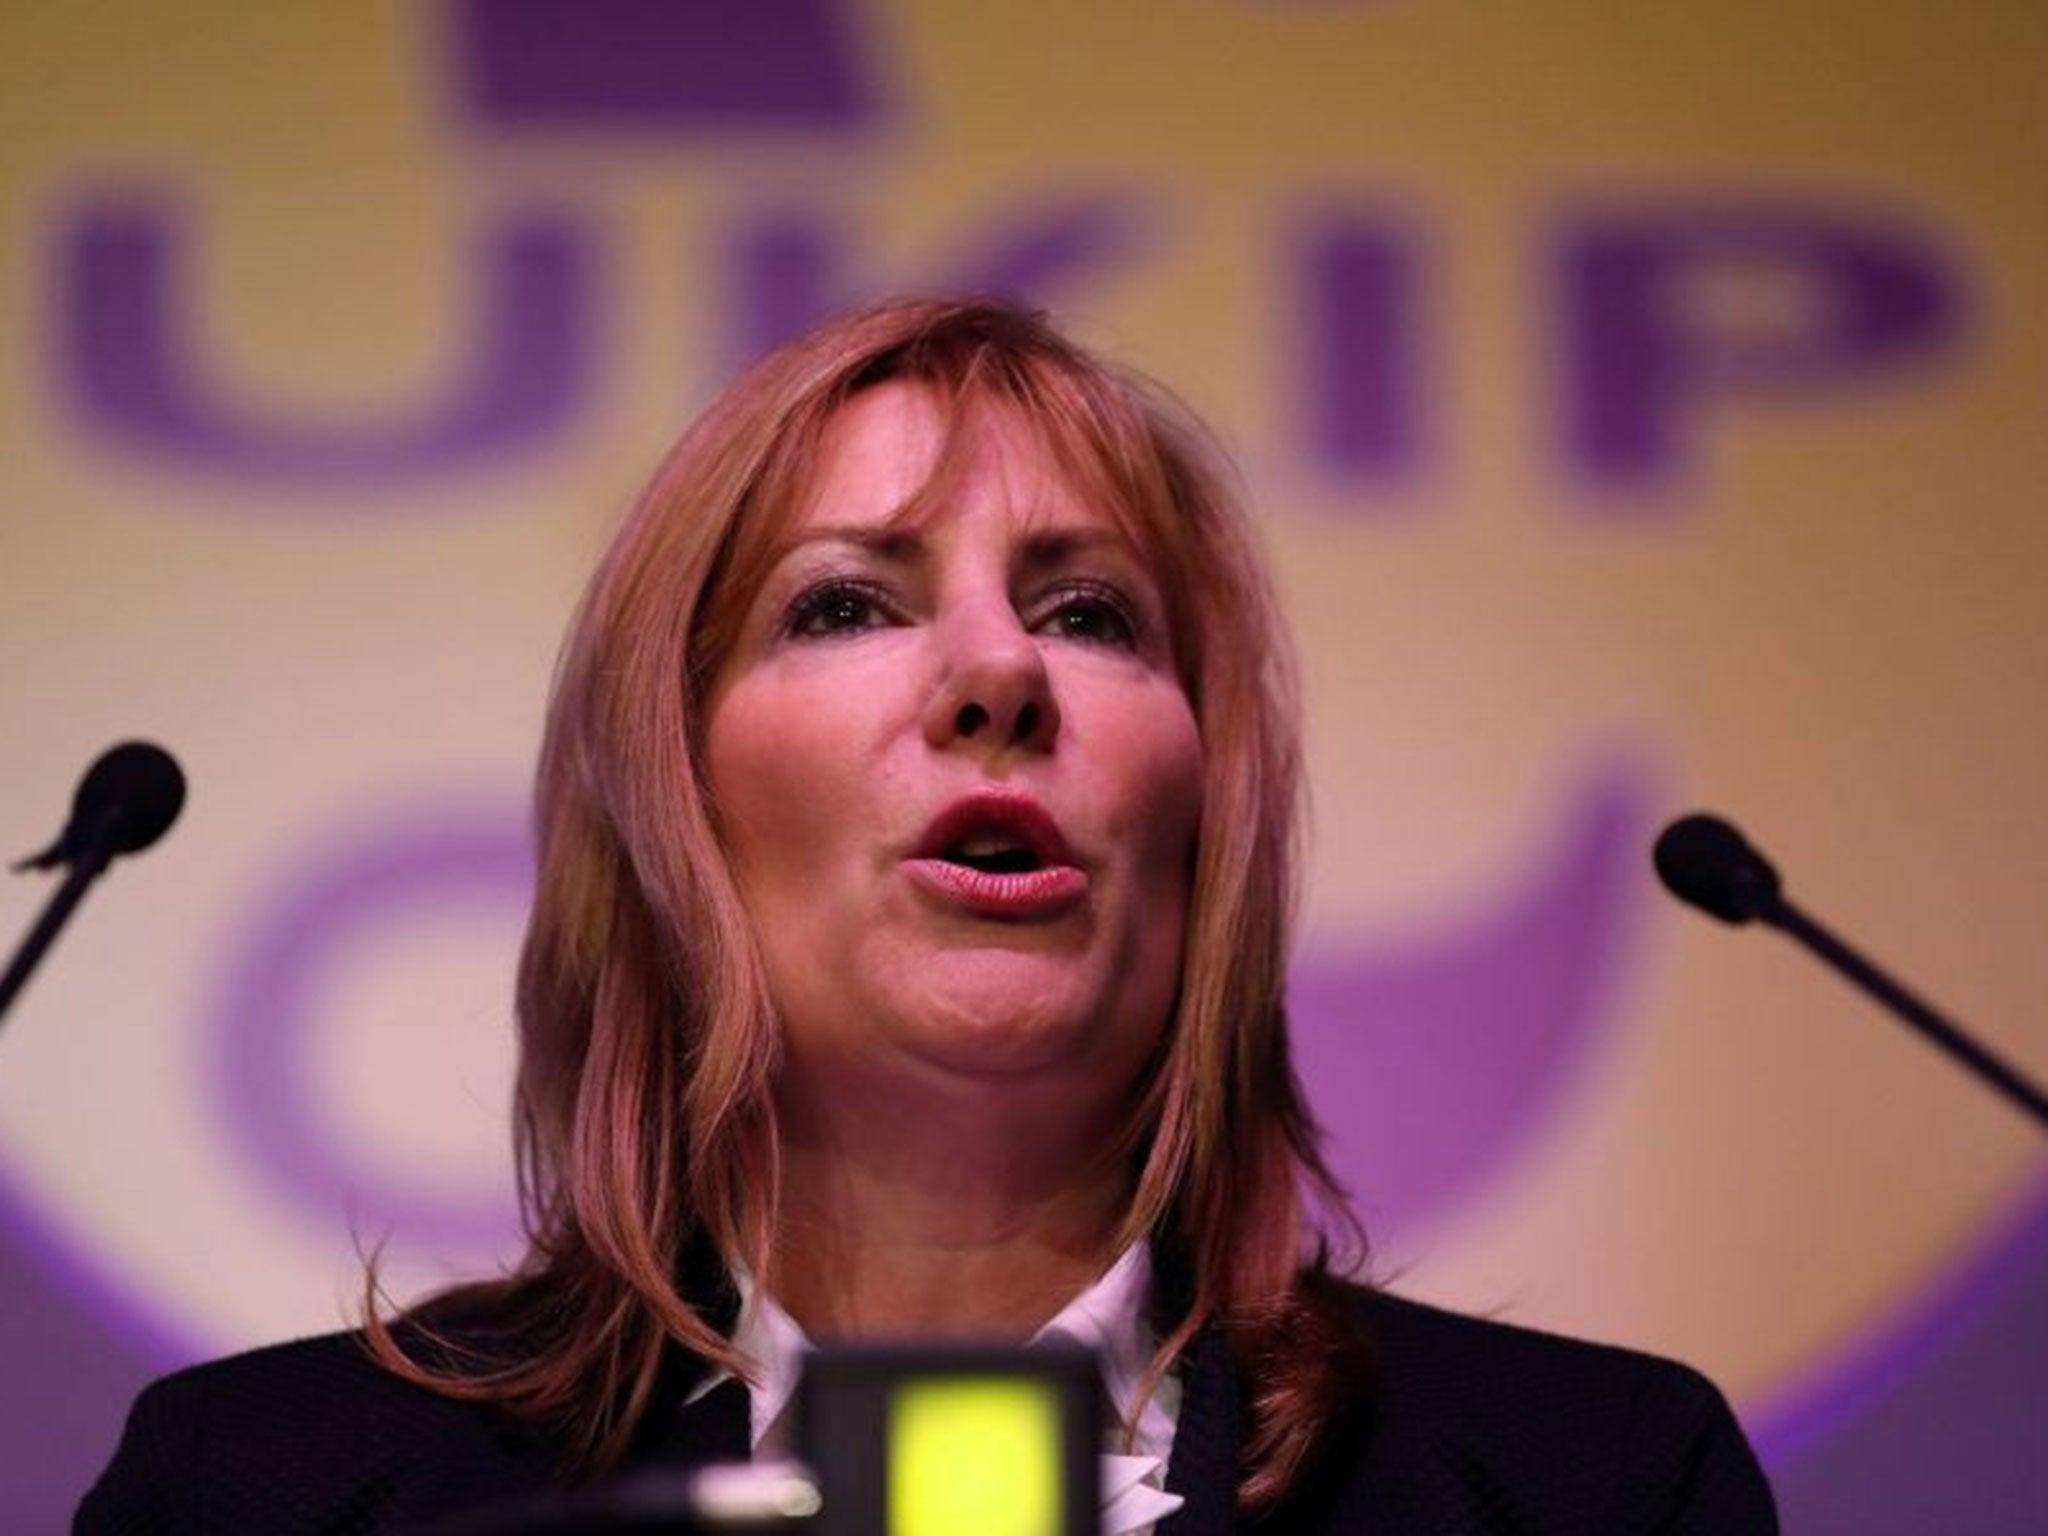 Janice Atkinson was expelled by Ukip for bringing the party into disrepute over claims about inflated expenses